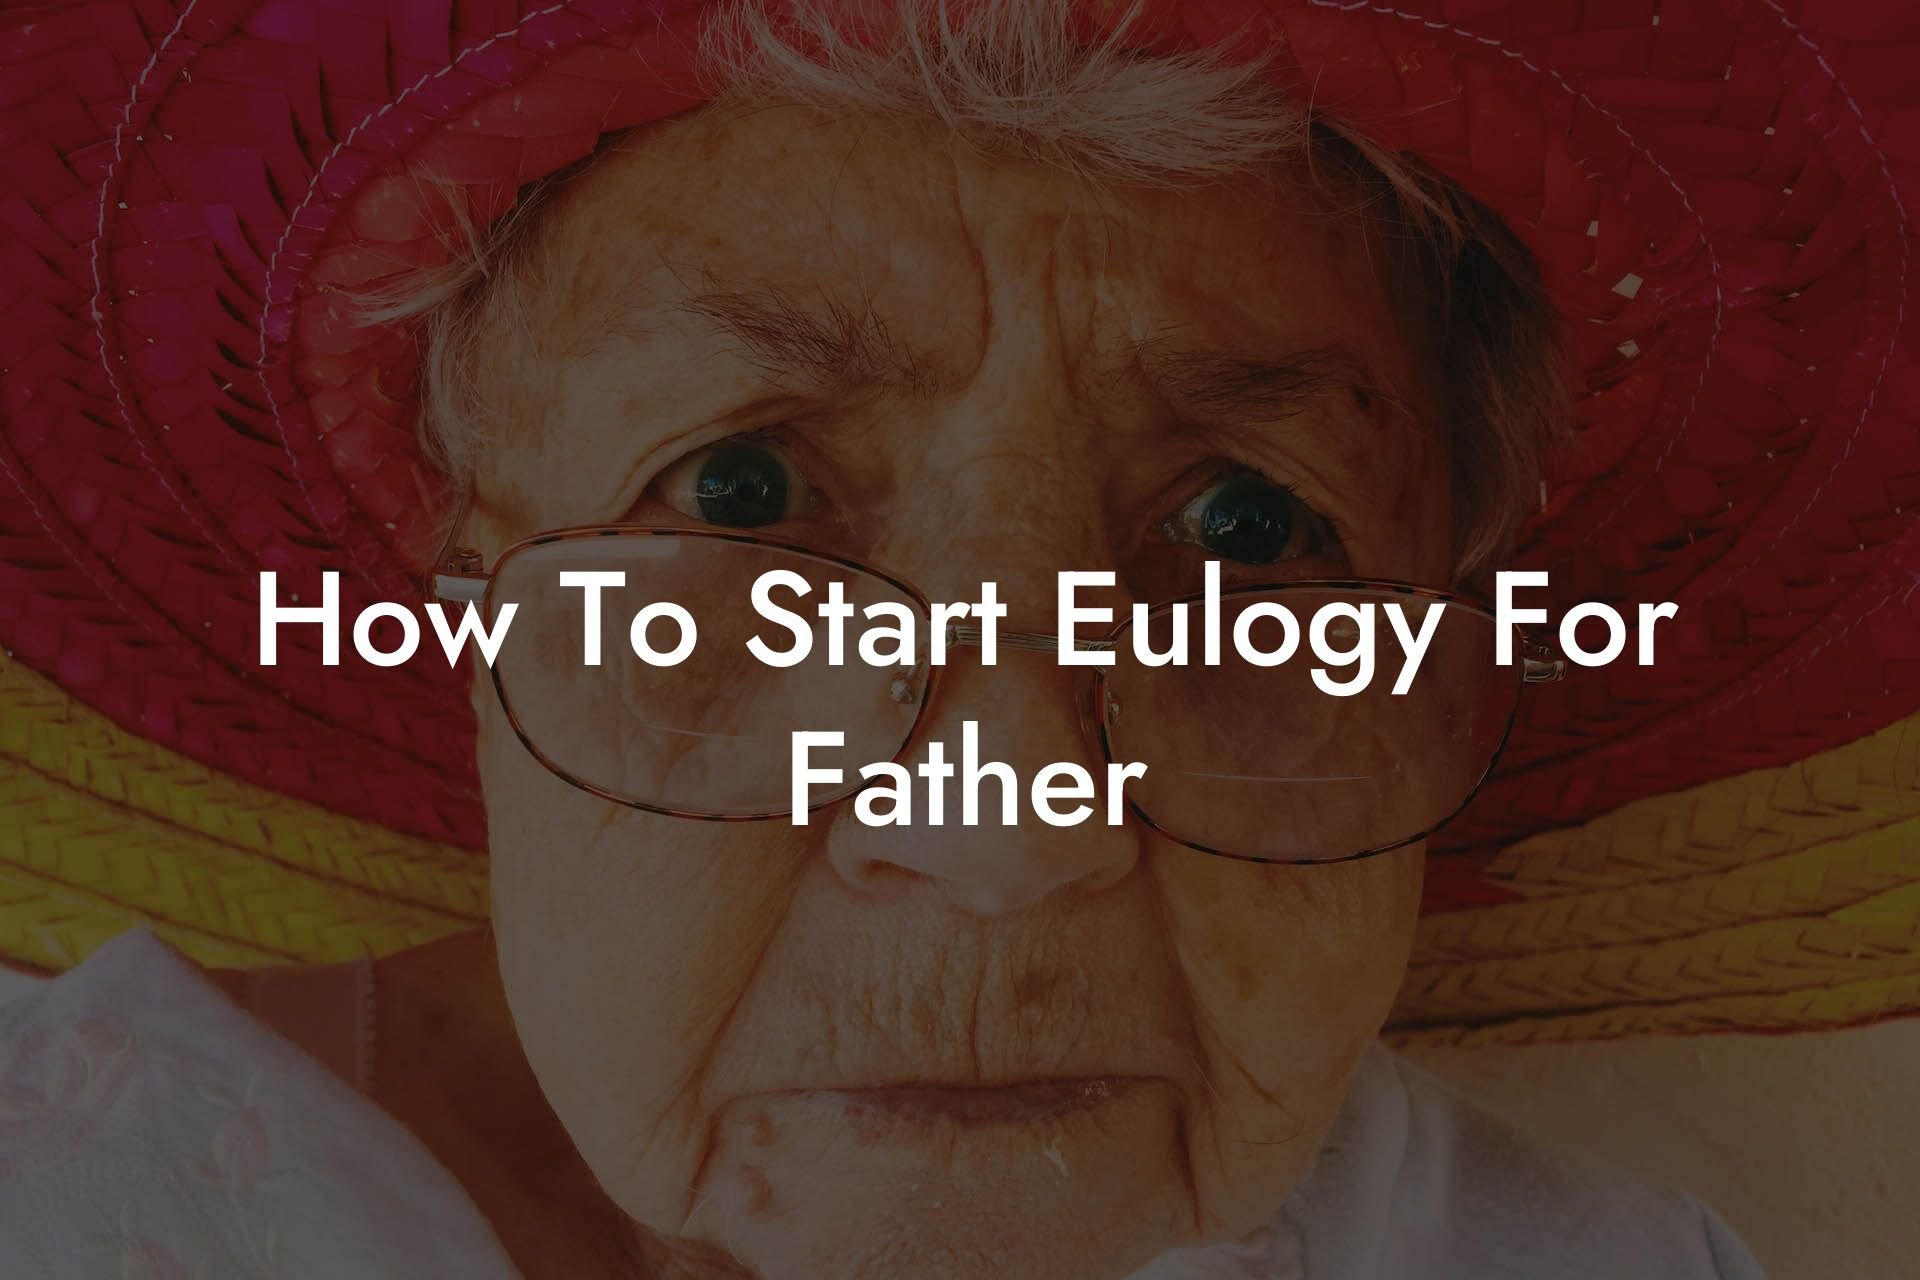 How To Start Eulogy For Father